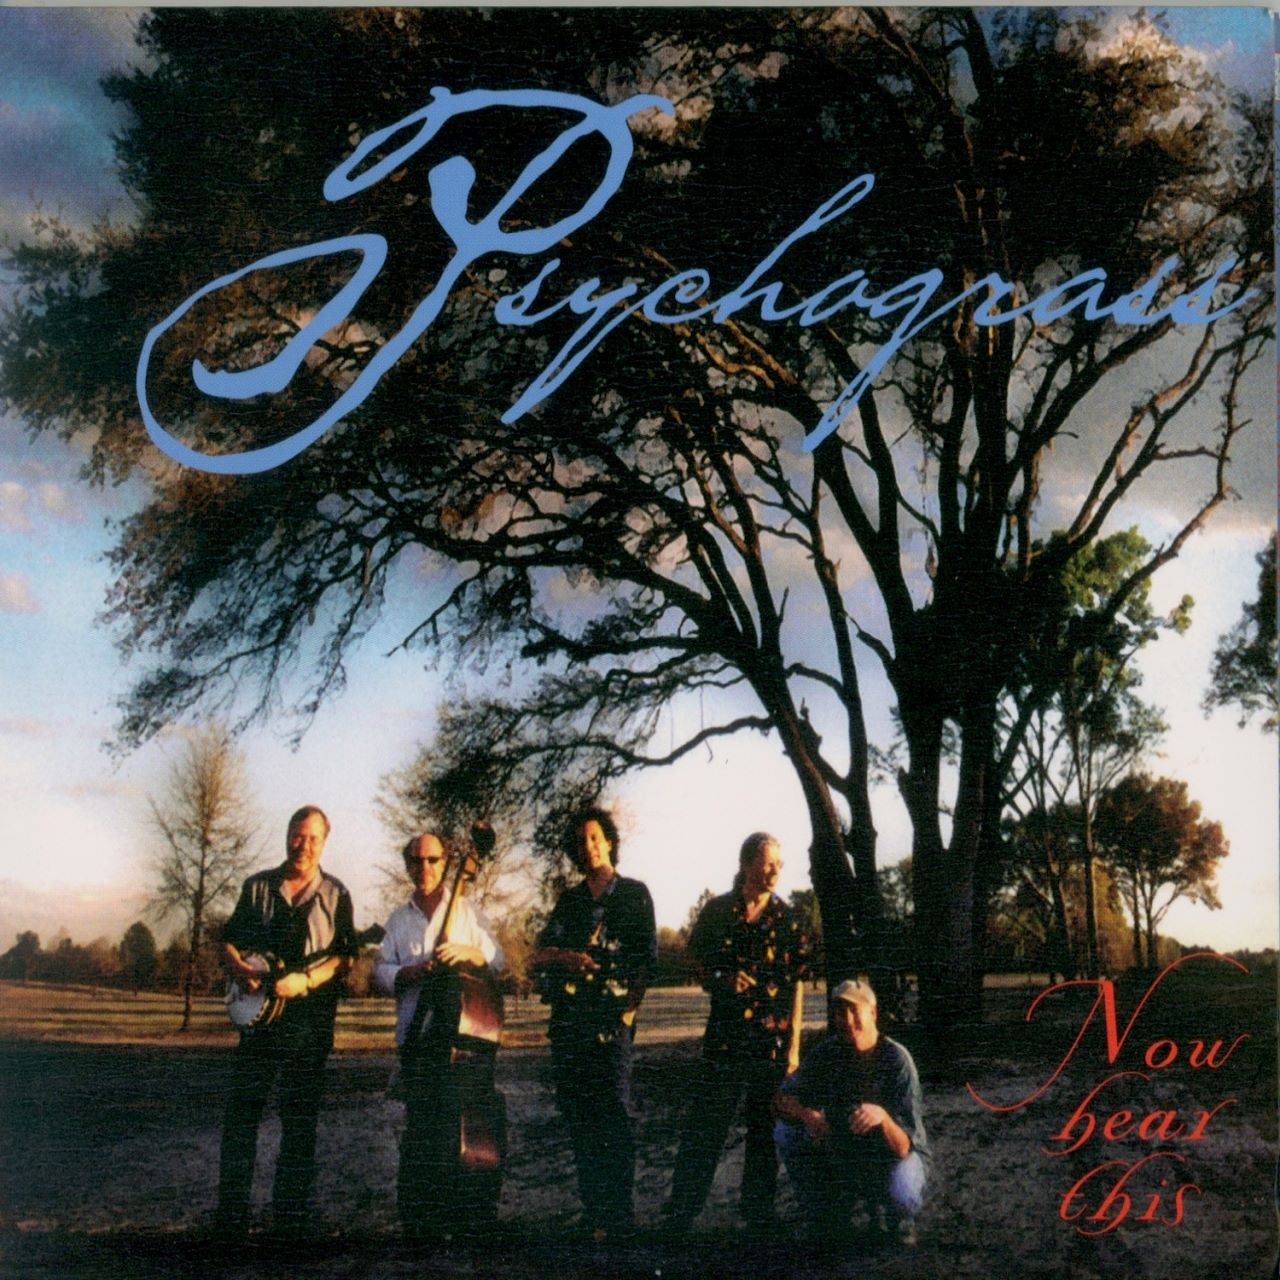 Psychograss - Now Hear This cover album